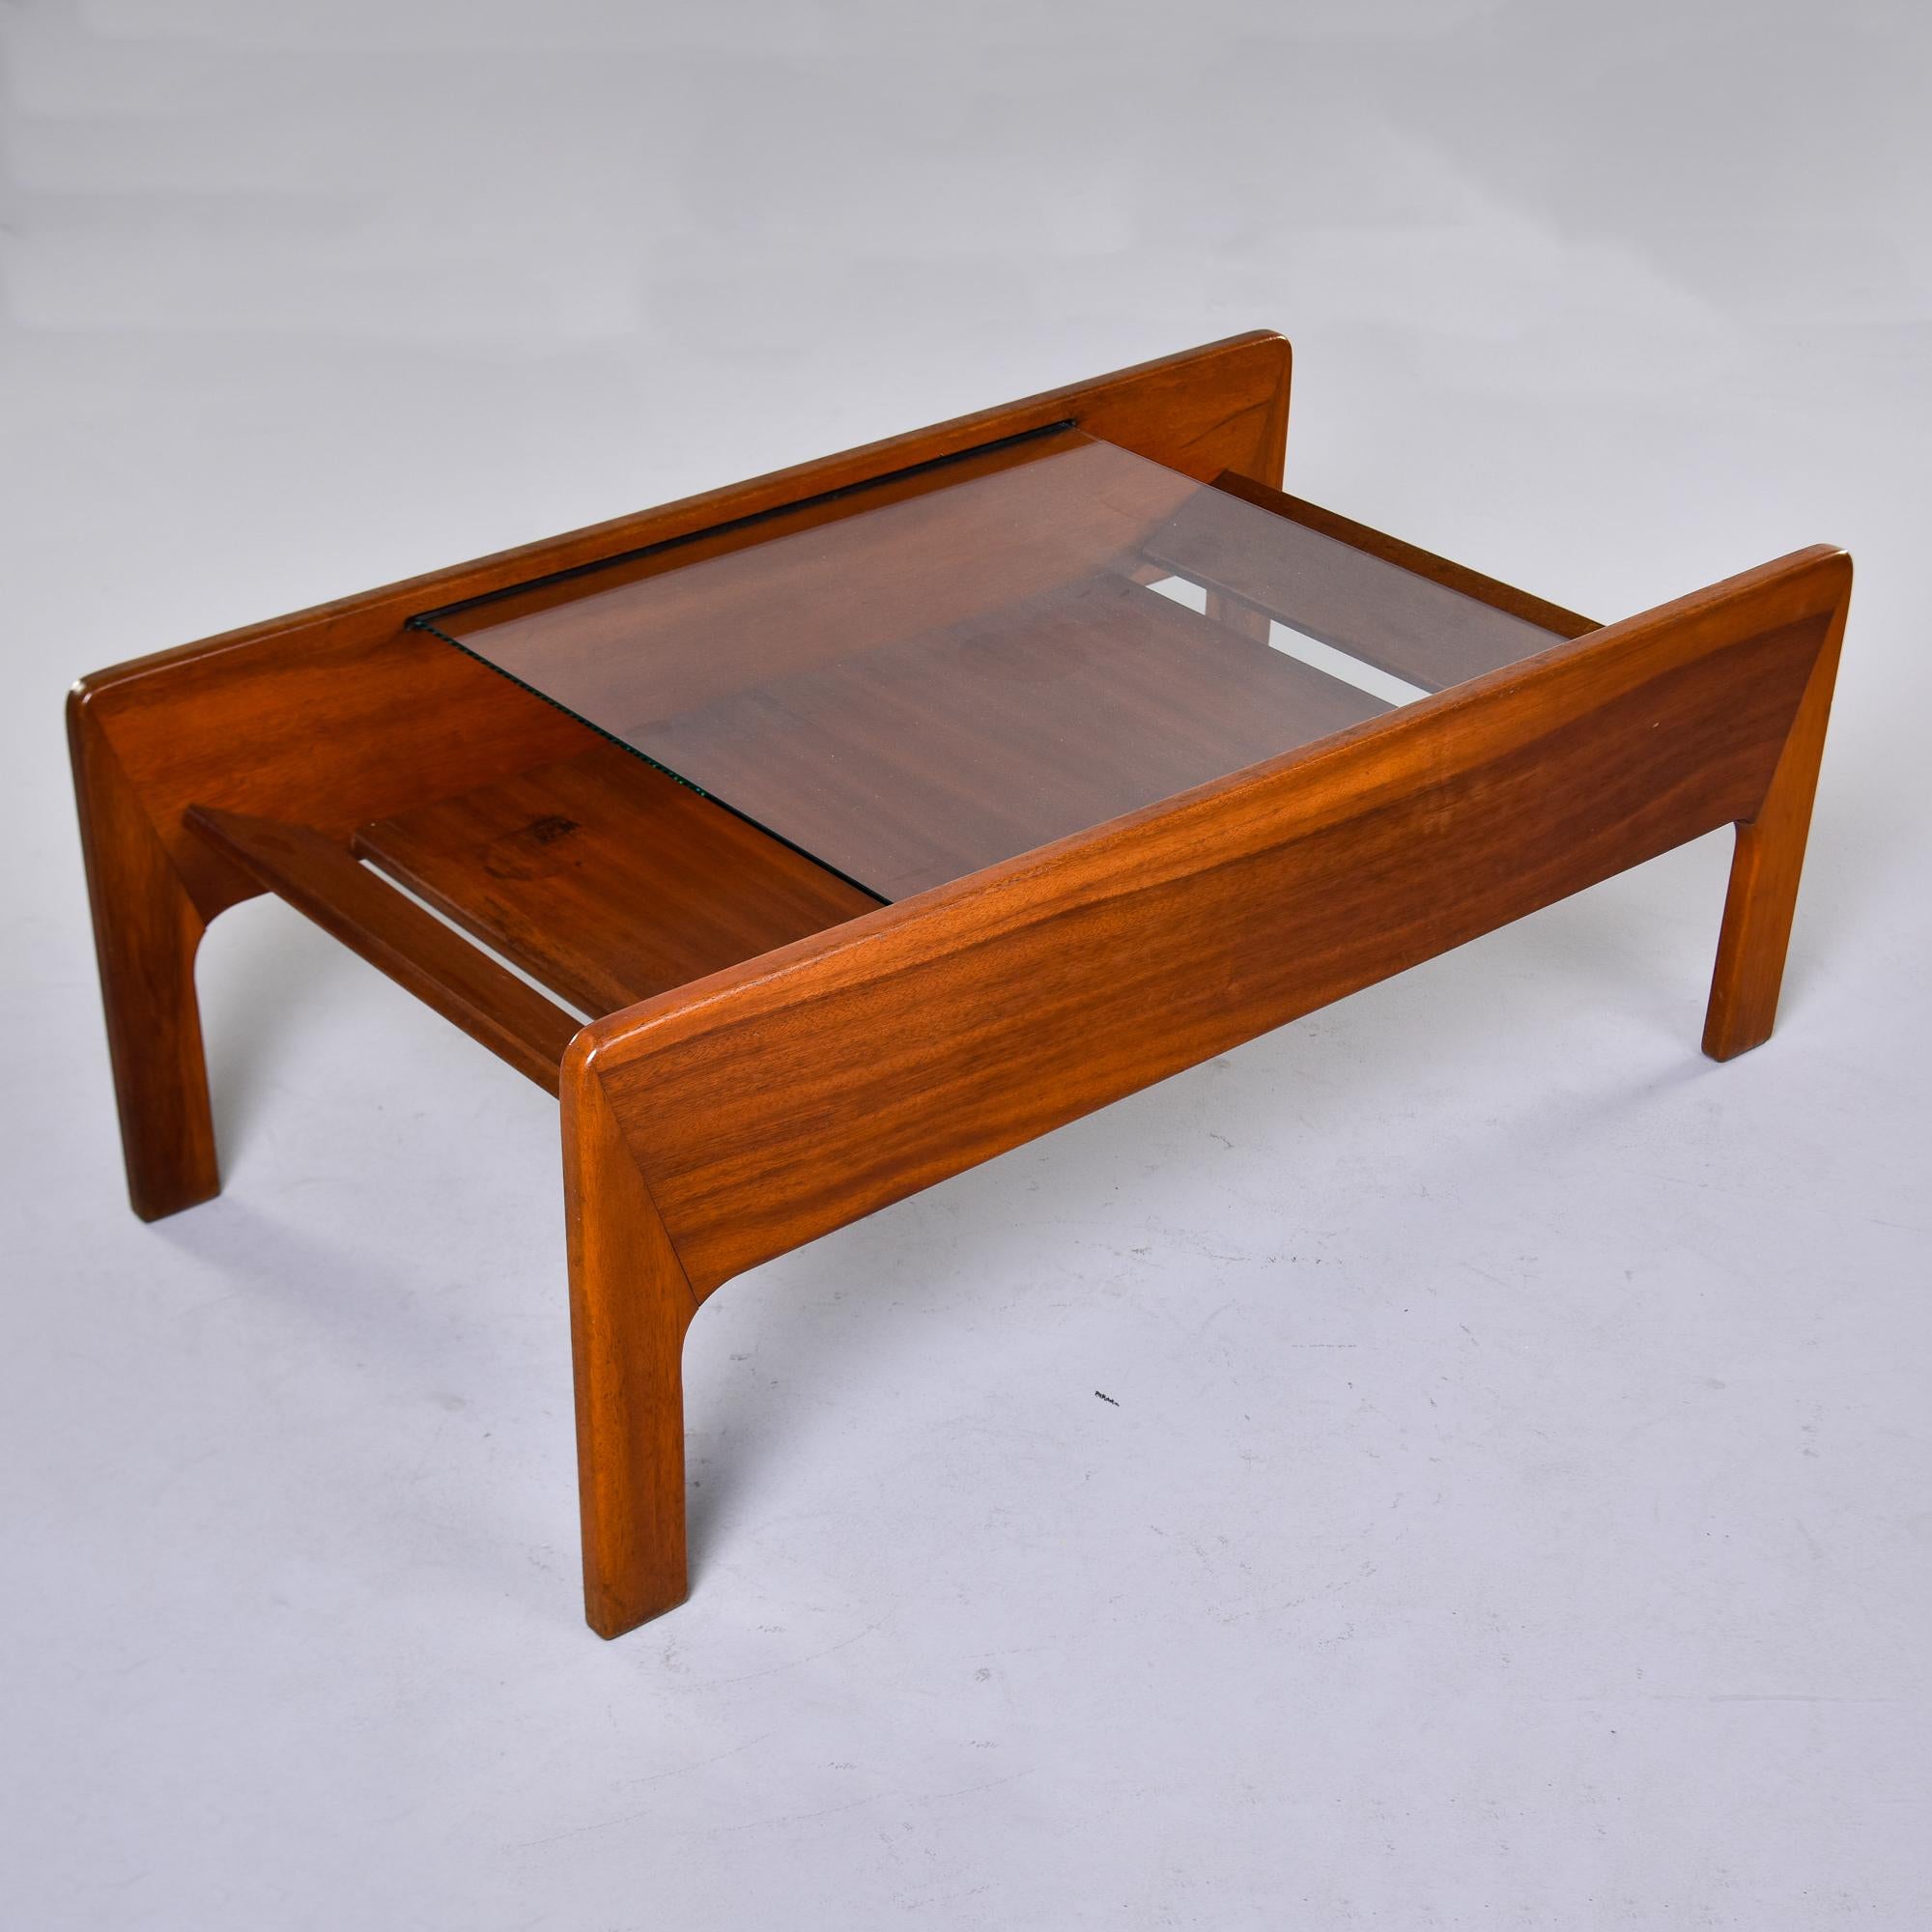 Found in France, this unusual coffee or cocktail table dates from the 1960s. We believe this is made of teak, with a base featuring prominent, curved corners where the legs meet, and a lower wood shelf flanked by angled, separated wood end pieces.